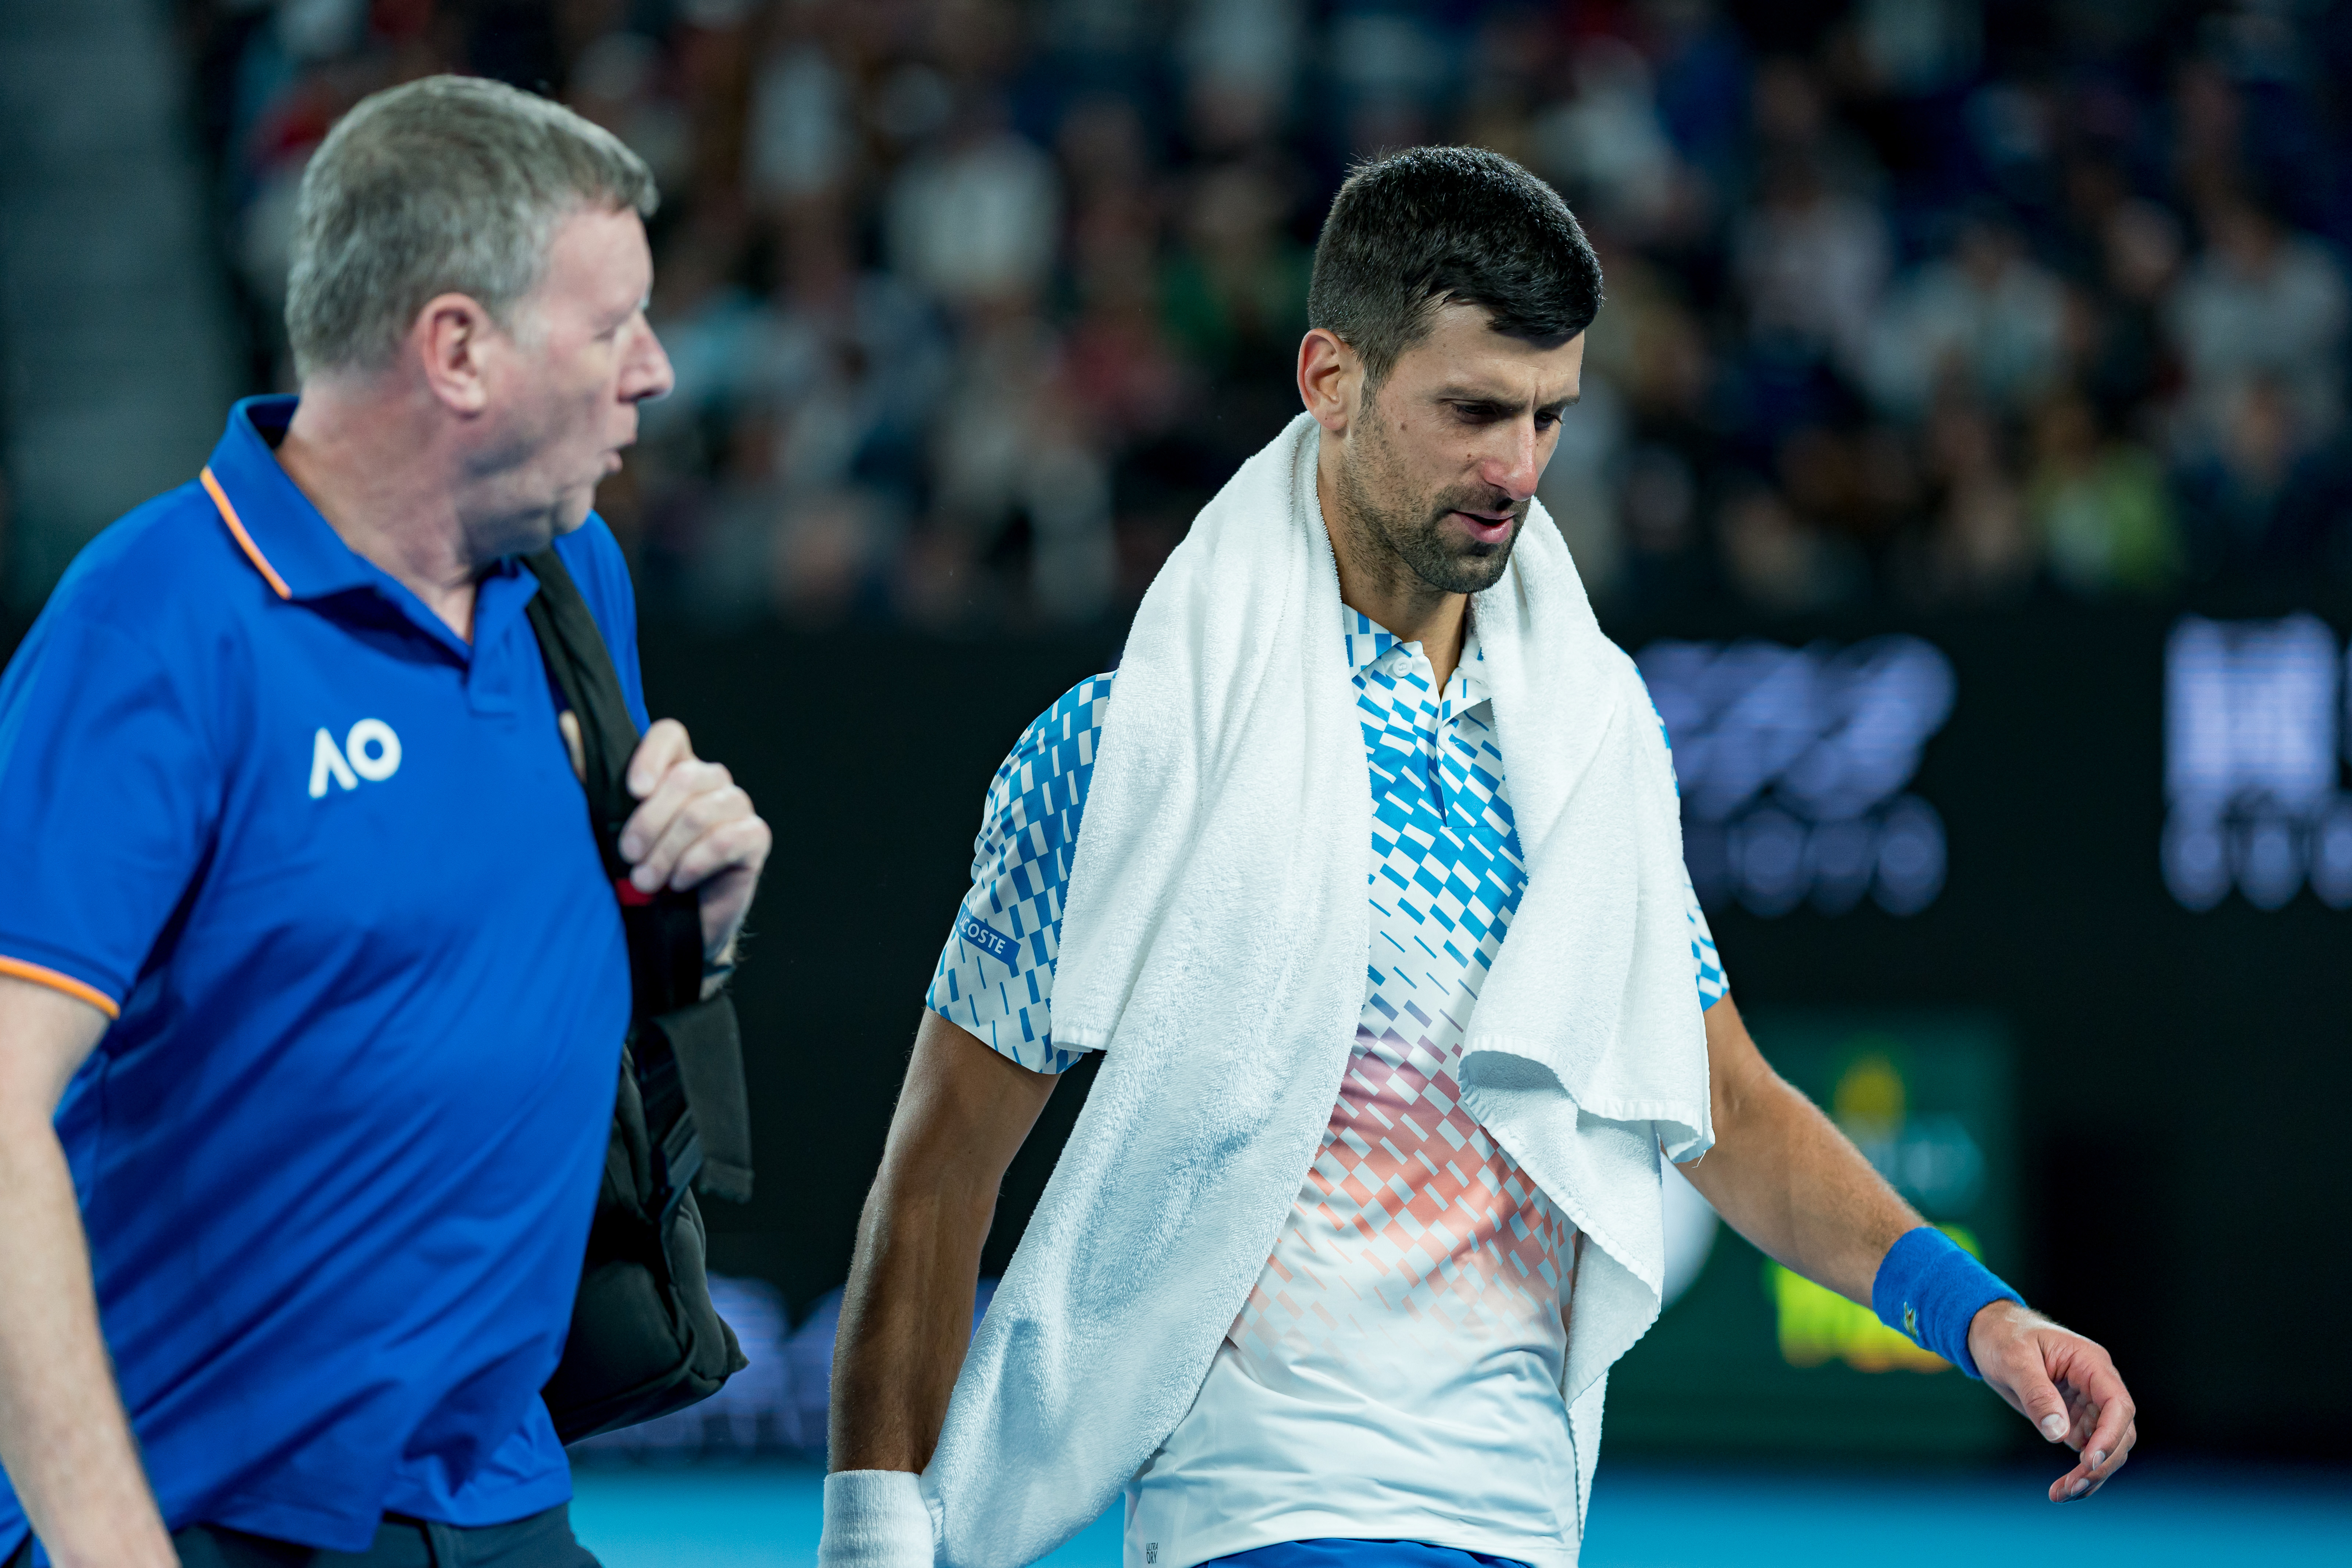 Australian Open 2023 Worried Djokovics concerning reveal after four-set win over French qualifier Enzo Couacaud